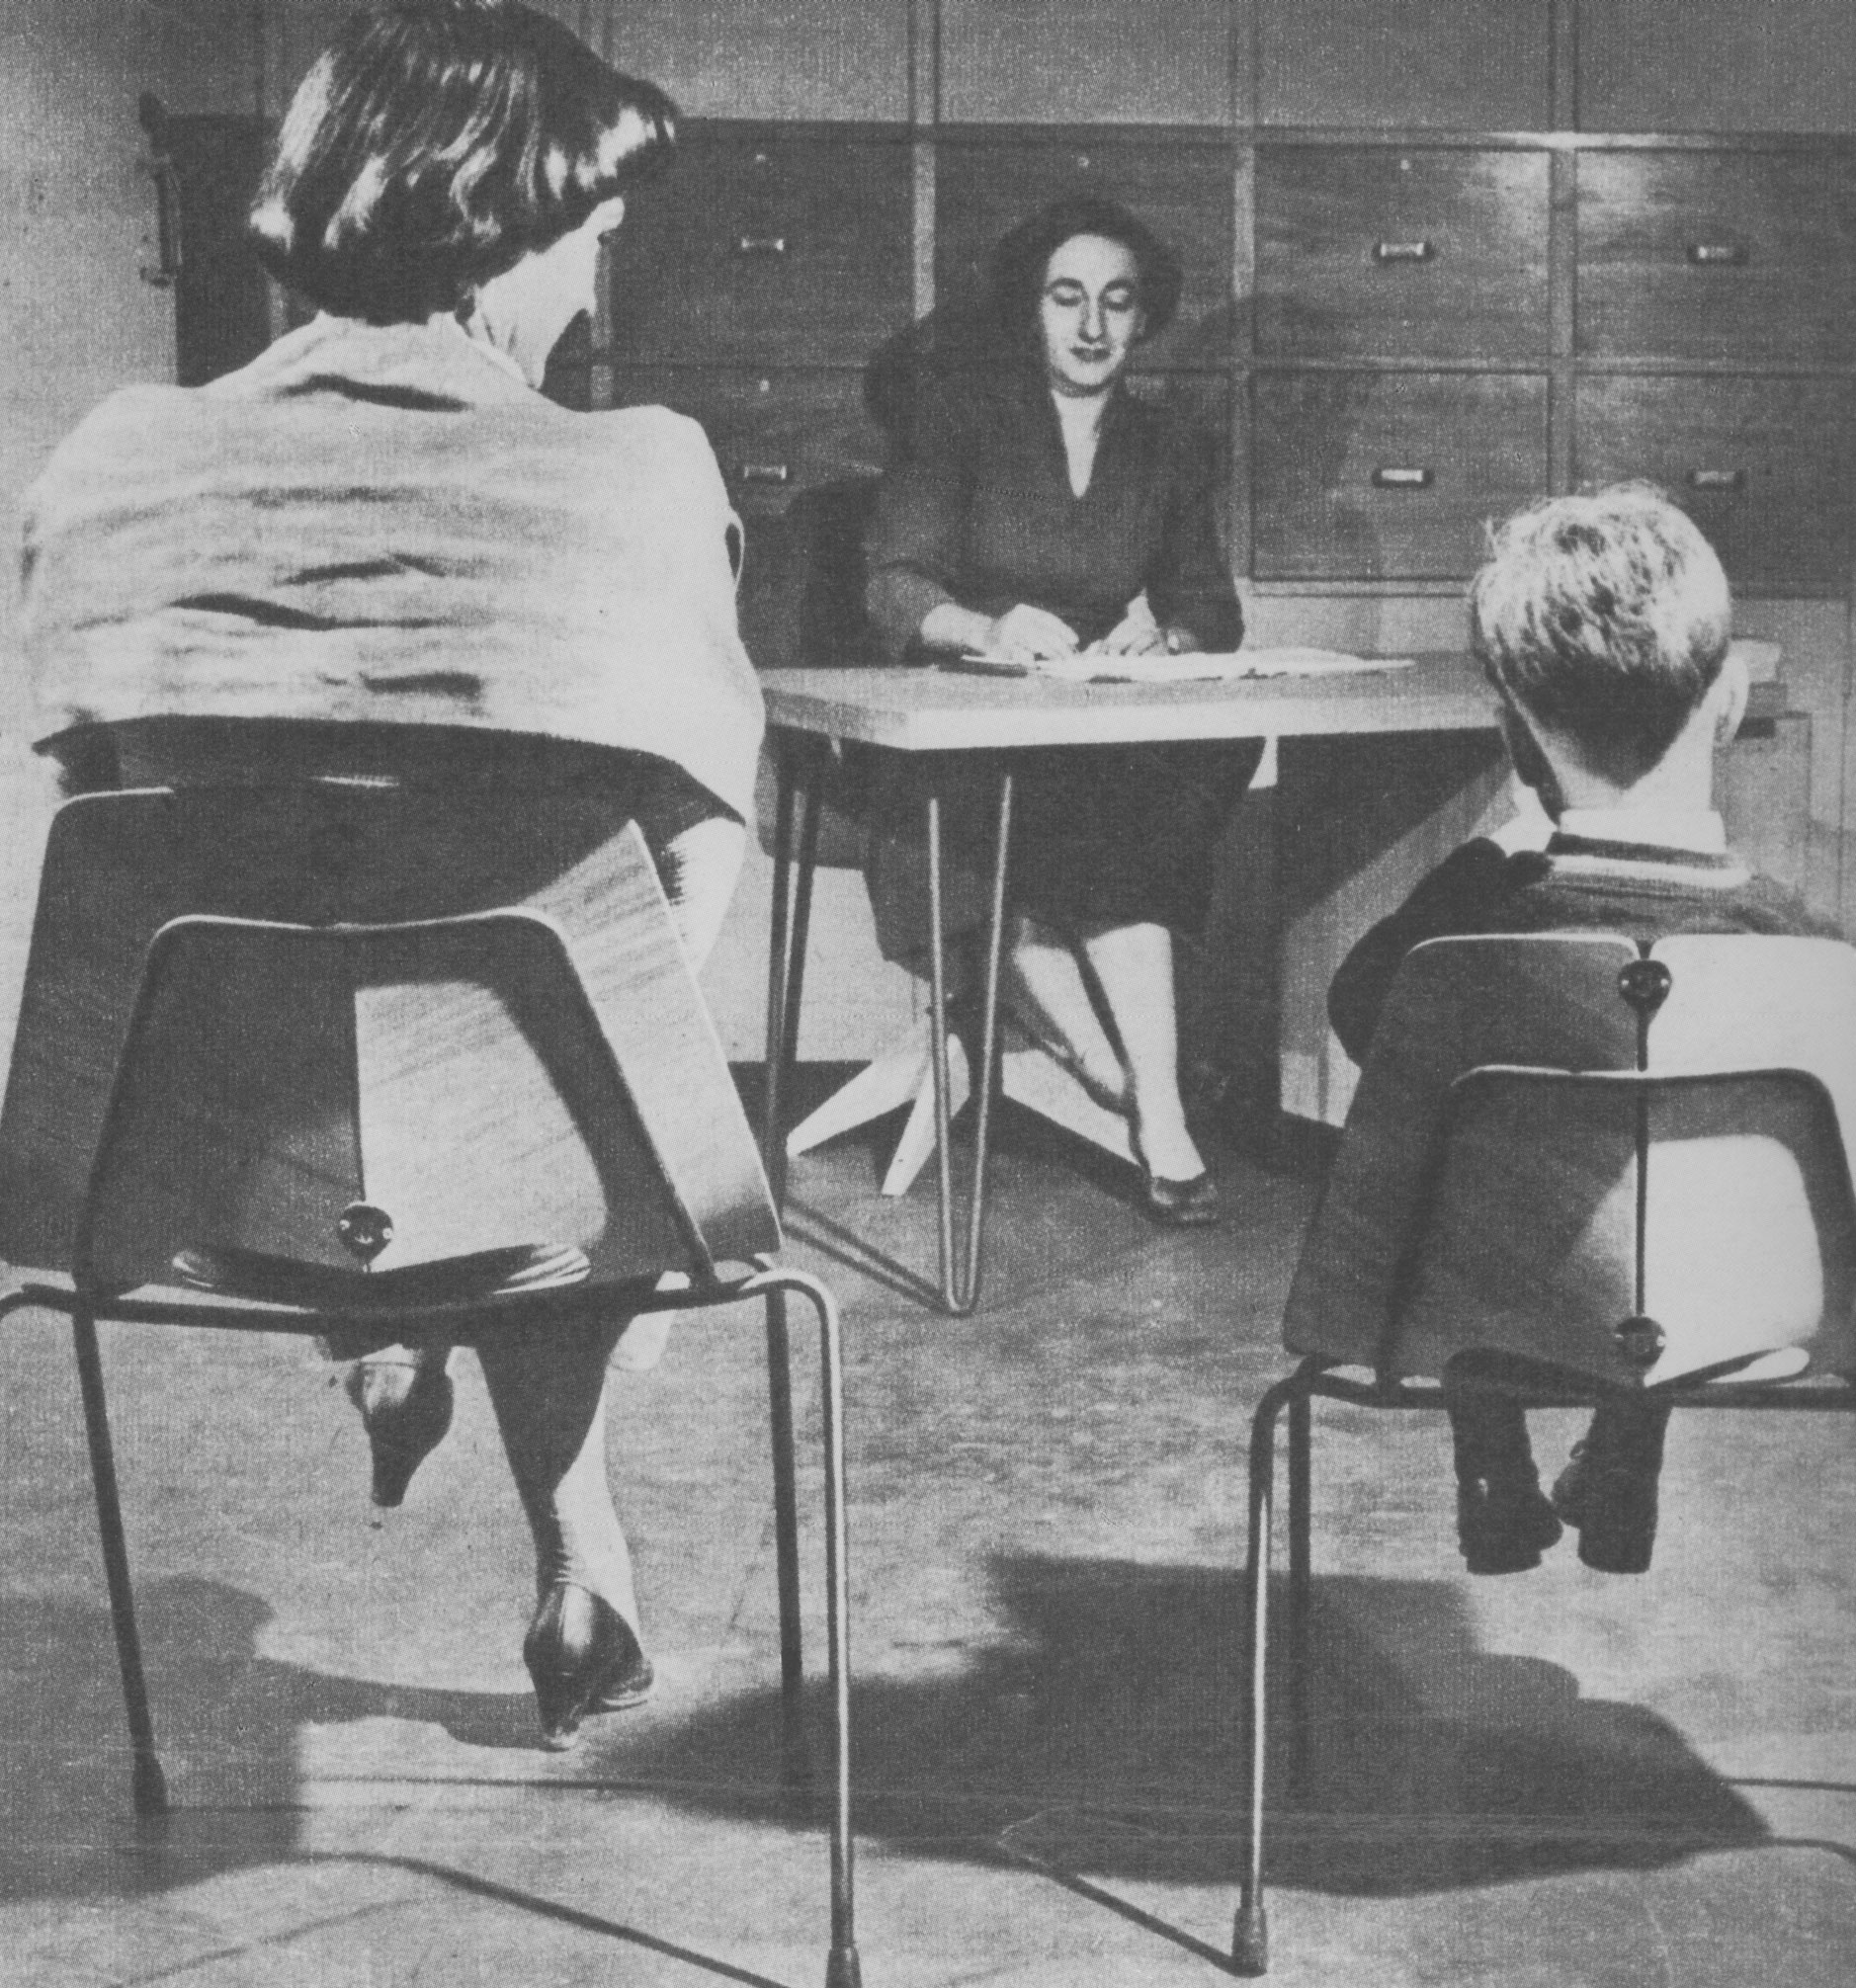 University of Melbourne Child Study Centre chairs, 1955